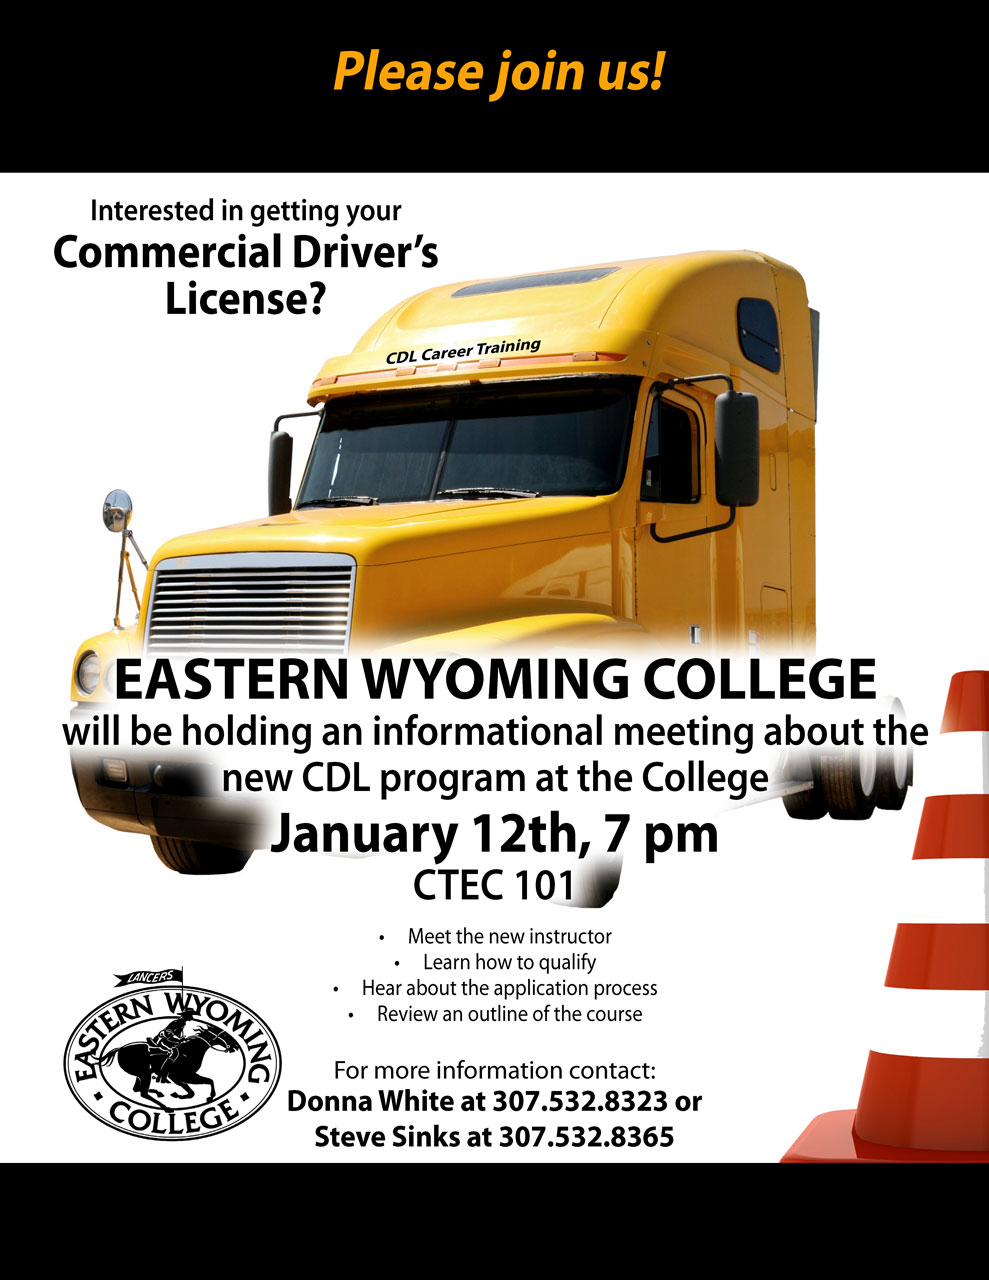 Eastern Wyoming College CDL Course